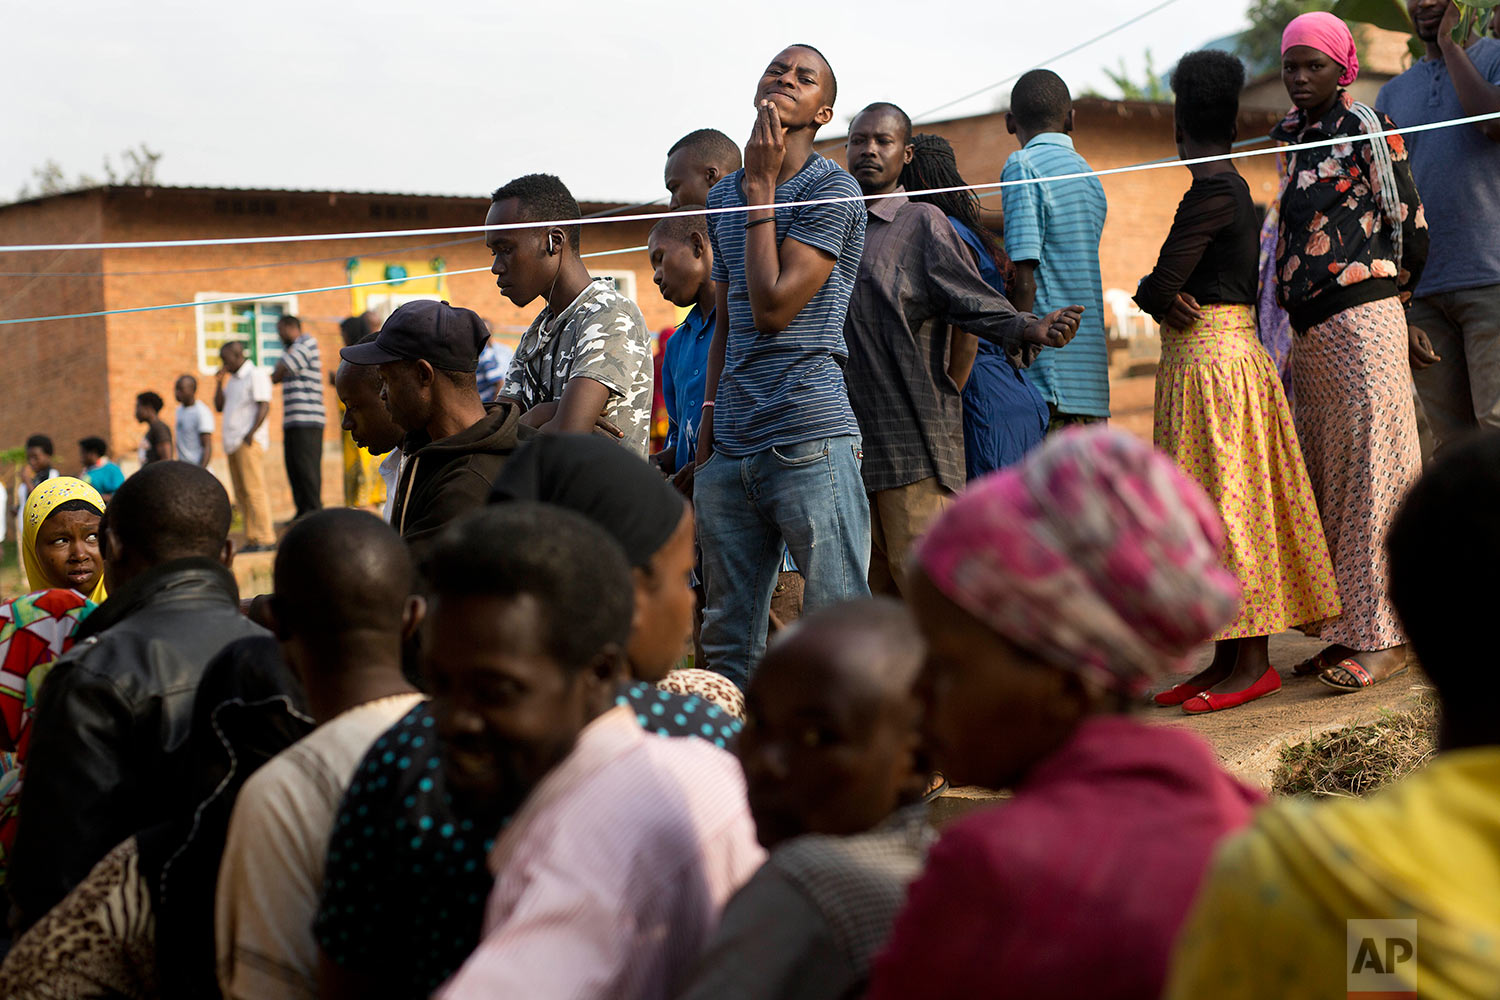  Rwandans line up to vote in a polling station in Rwanda's capital Kigali Friday Aug. 4, 2017 for the presidential elections in which outgoing president Paul Kagame is widely expected to win another term after the government disqualified all but thre